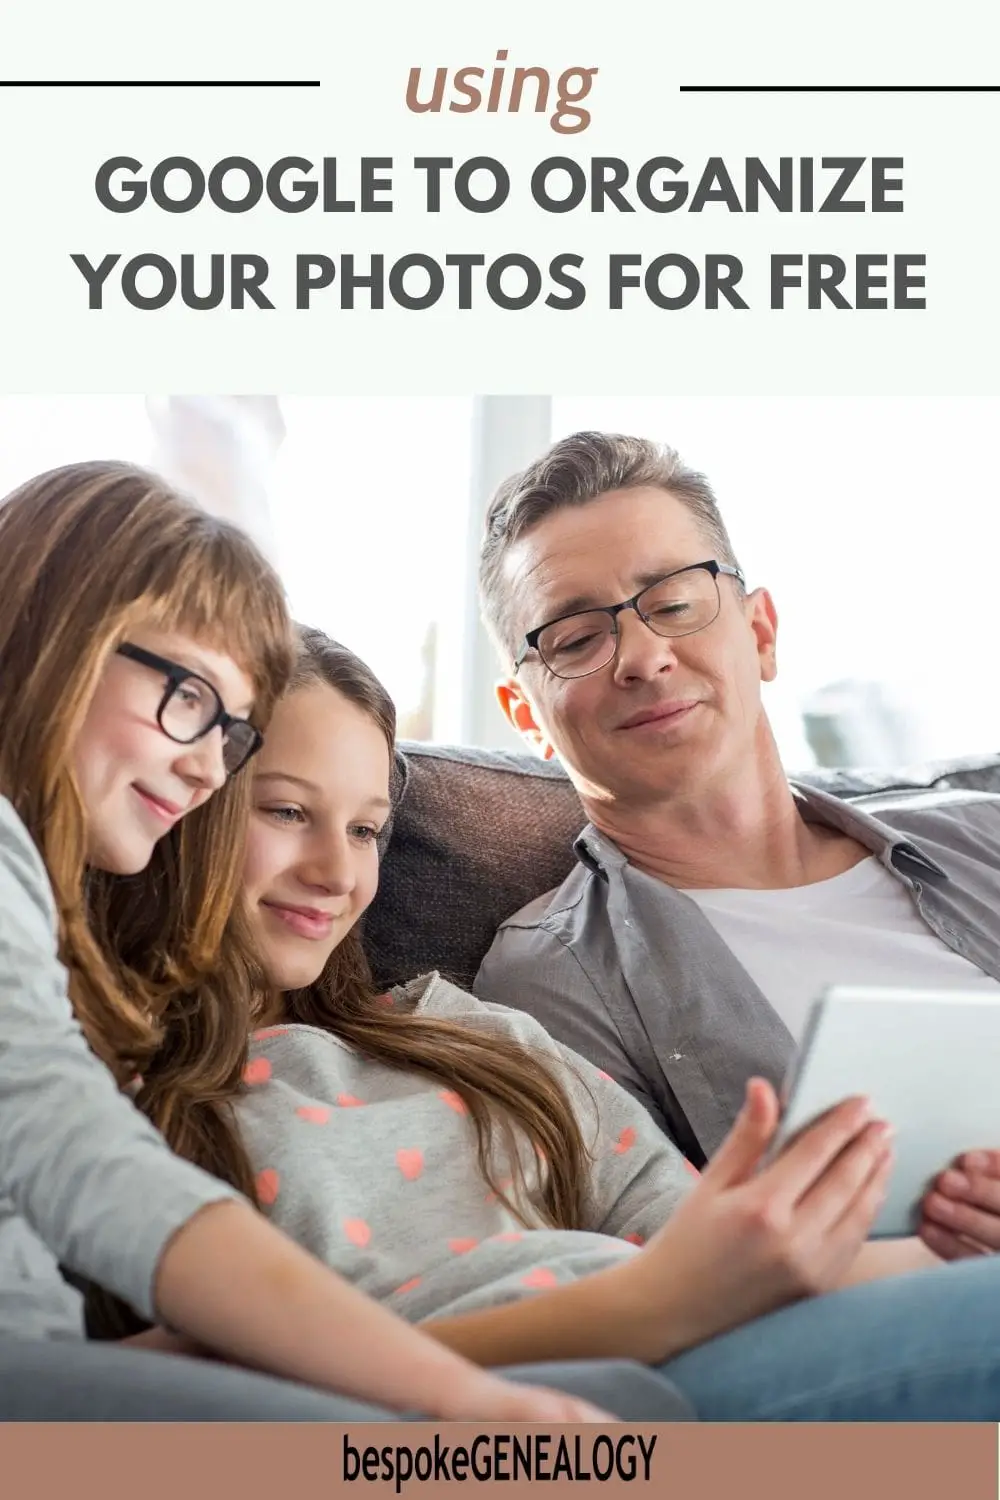 Using Google to organize your photos for free. Picture of a man on a sofa with his two daughters looking at a tablet together